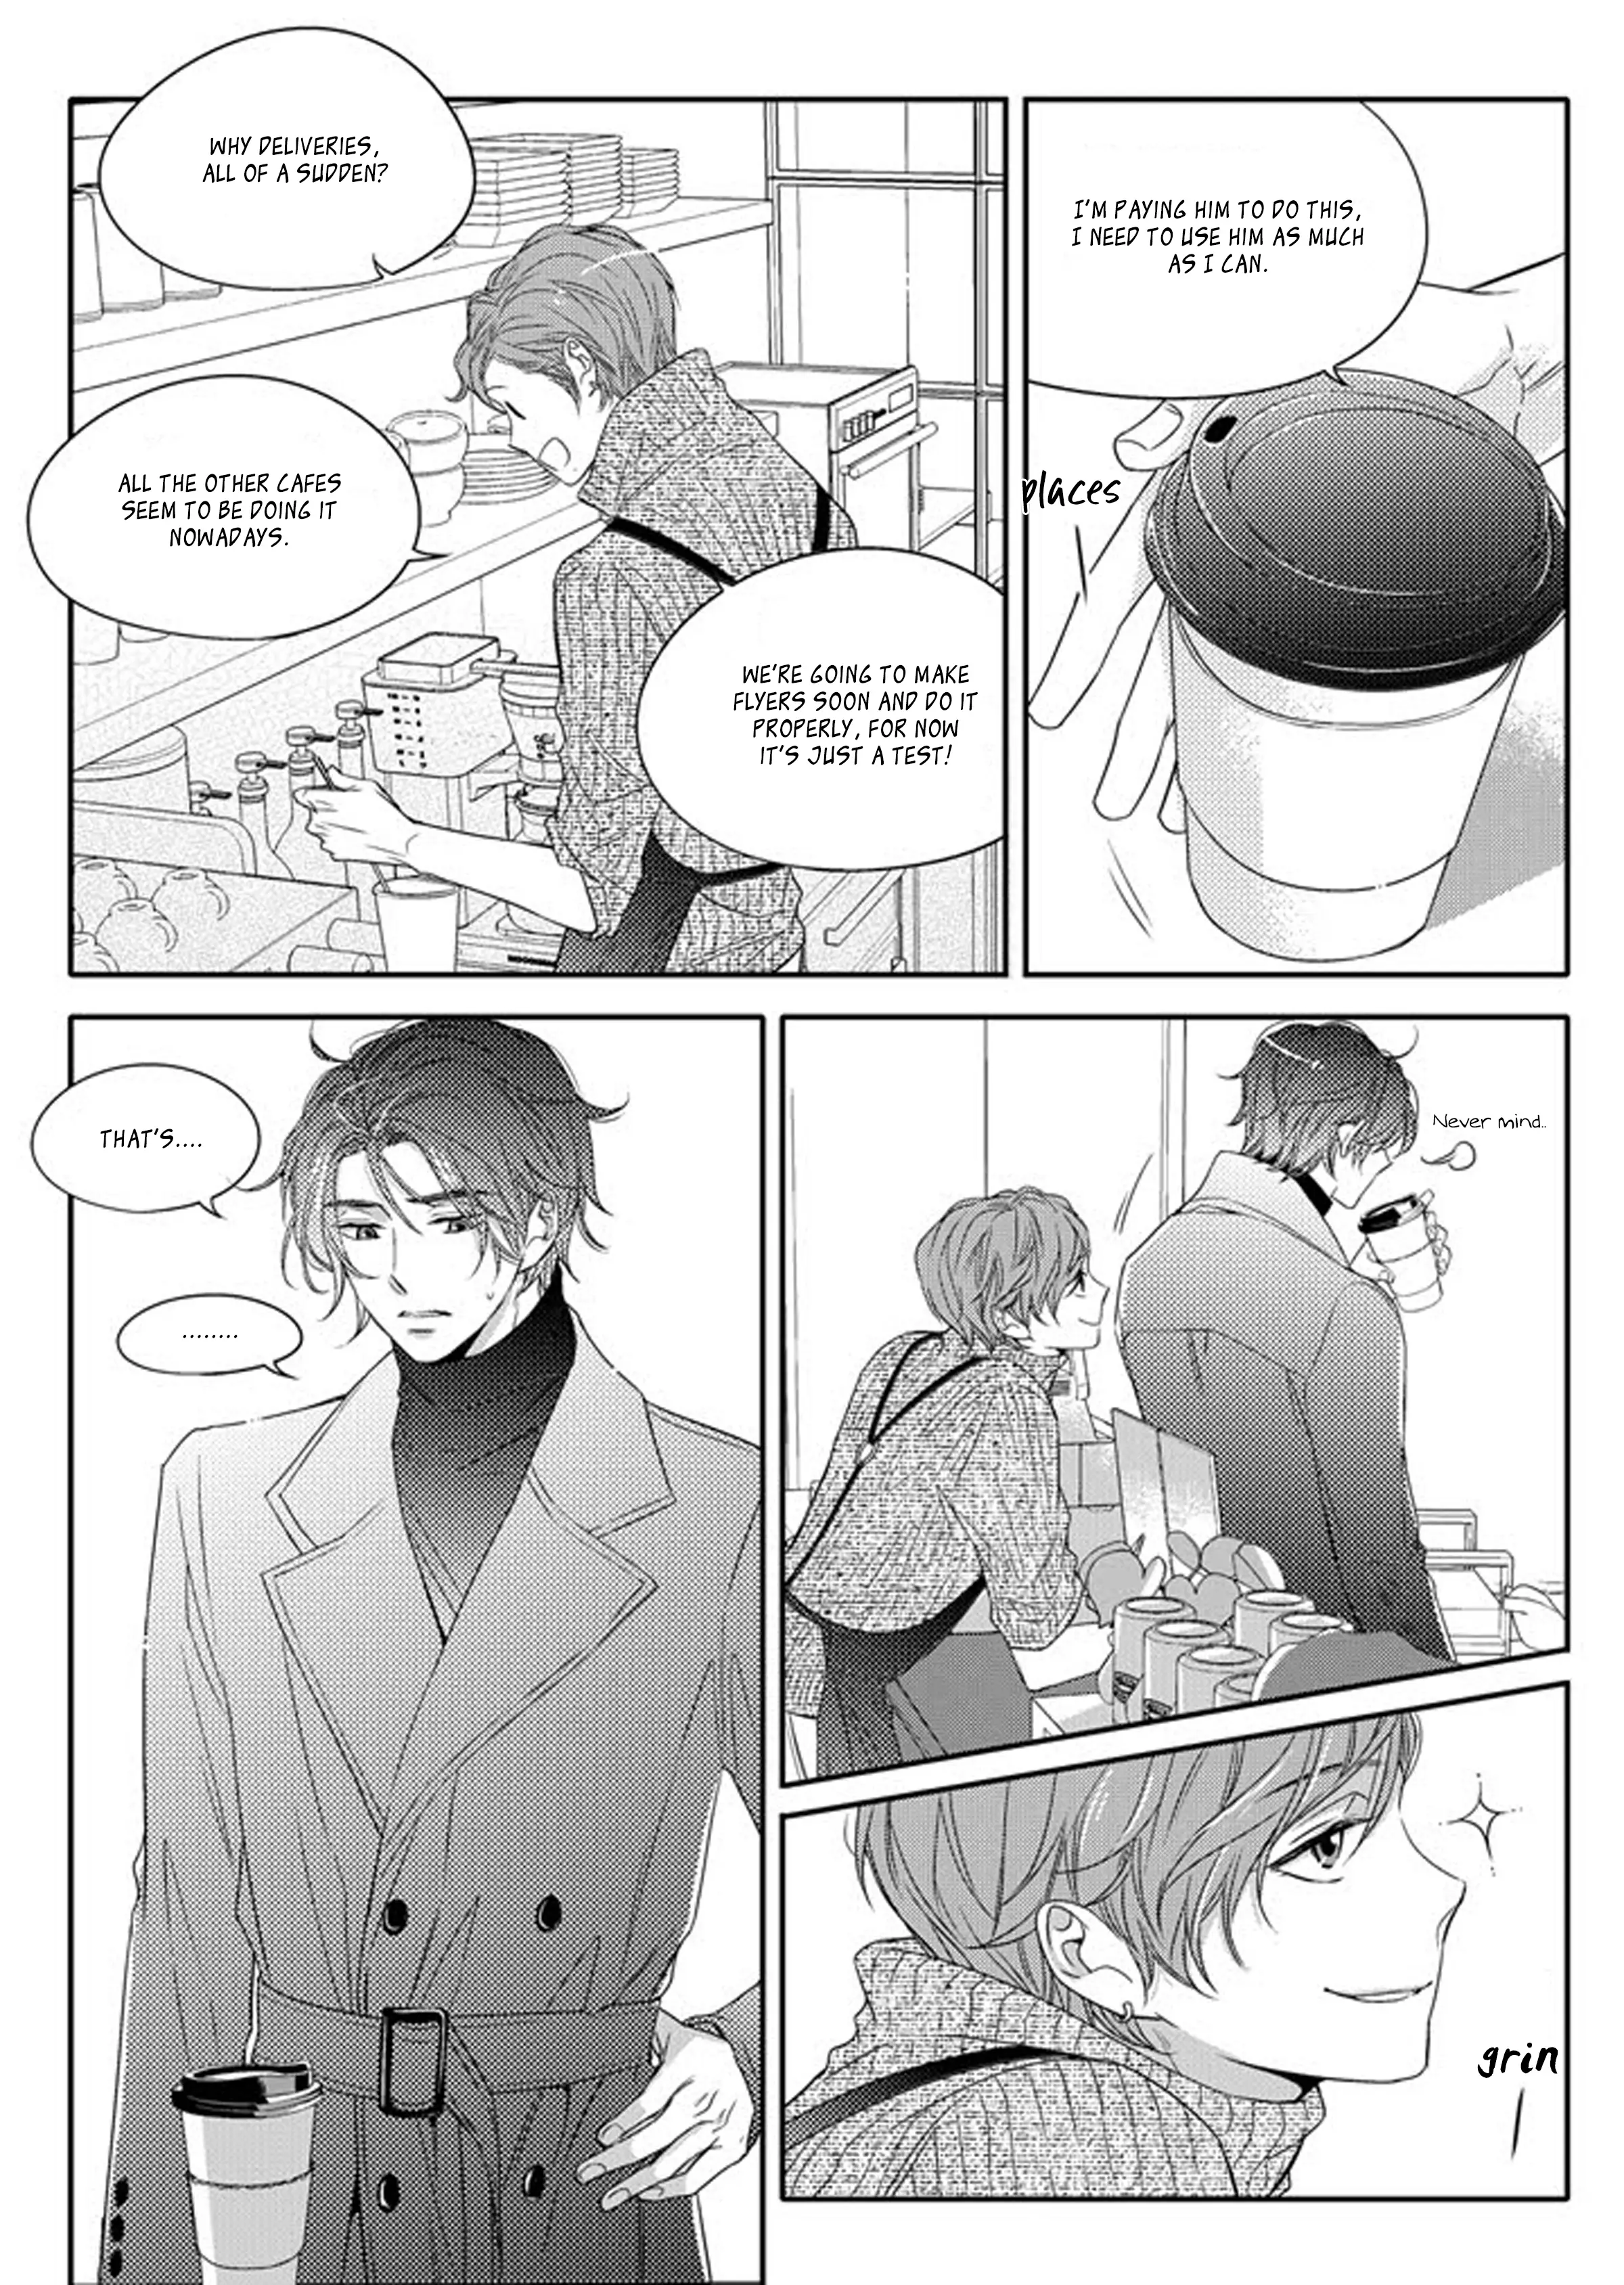 Unintentional Love Story - 7 page 15